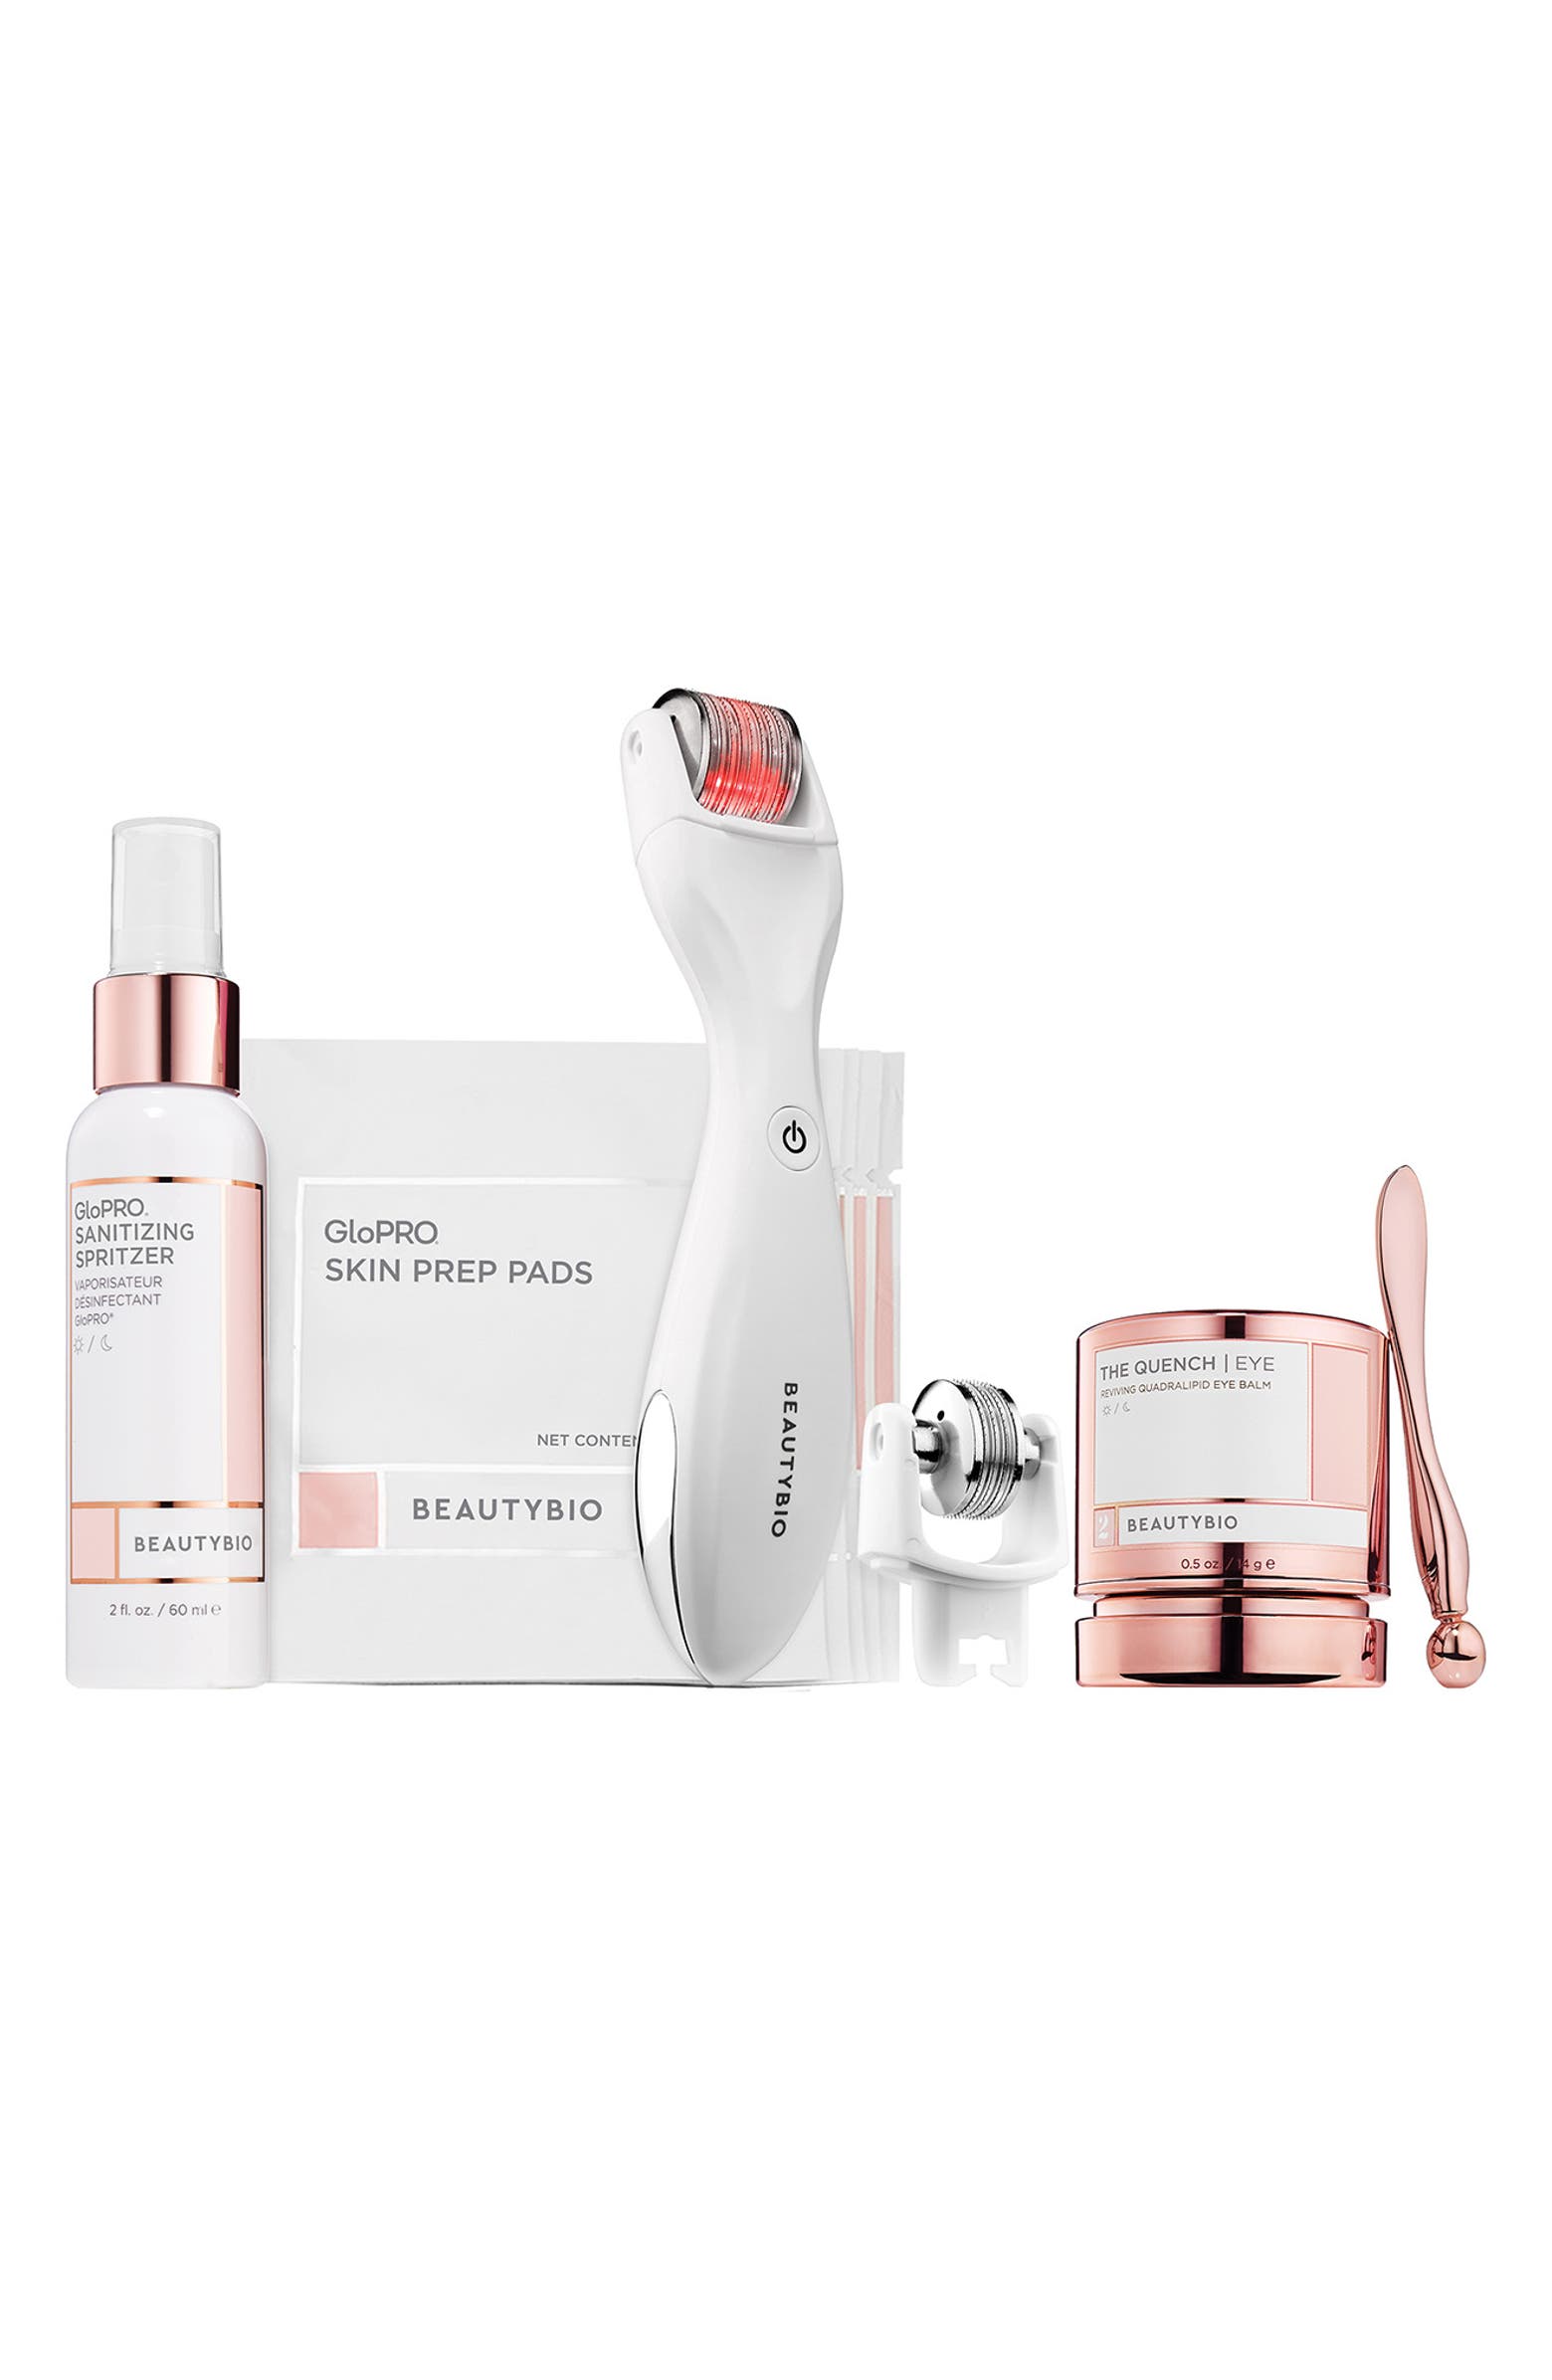 gifts for women in their 30s : Eye and Face care set